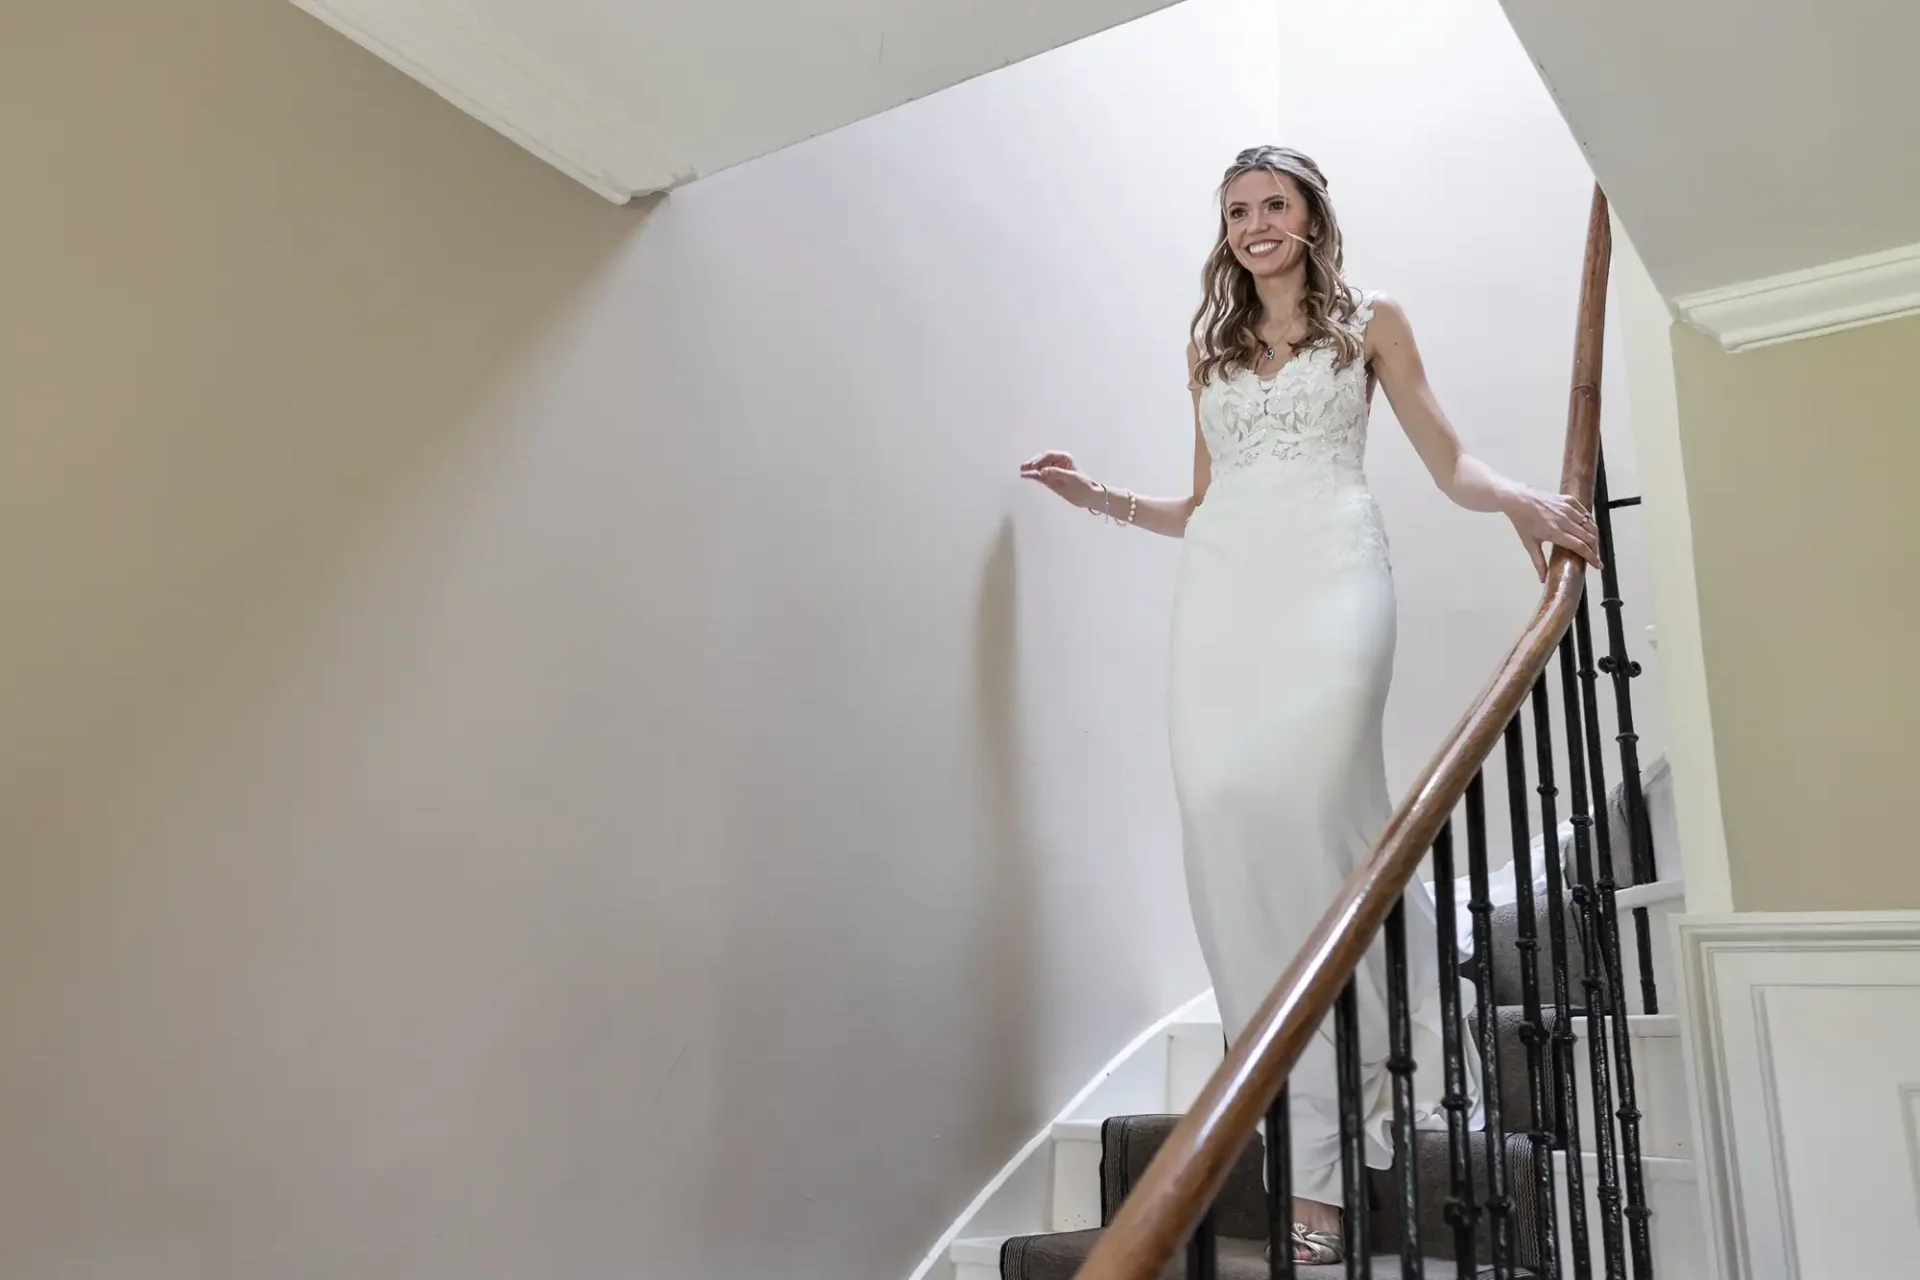 A woman in a white wedding dress smiles while walking down a staircase.